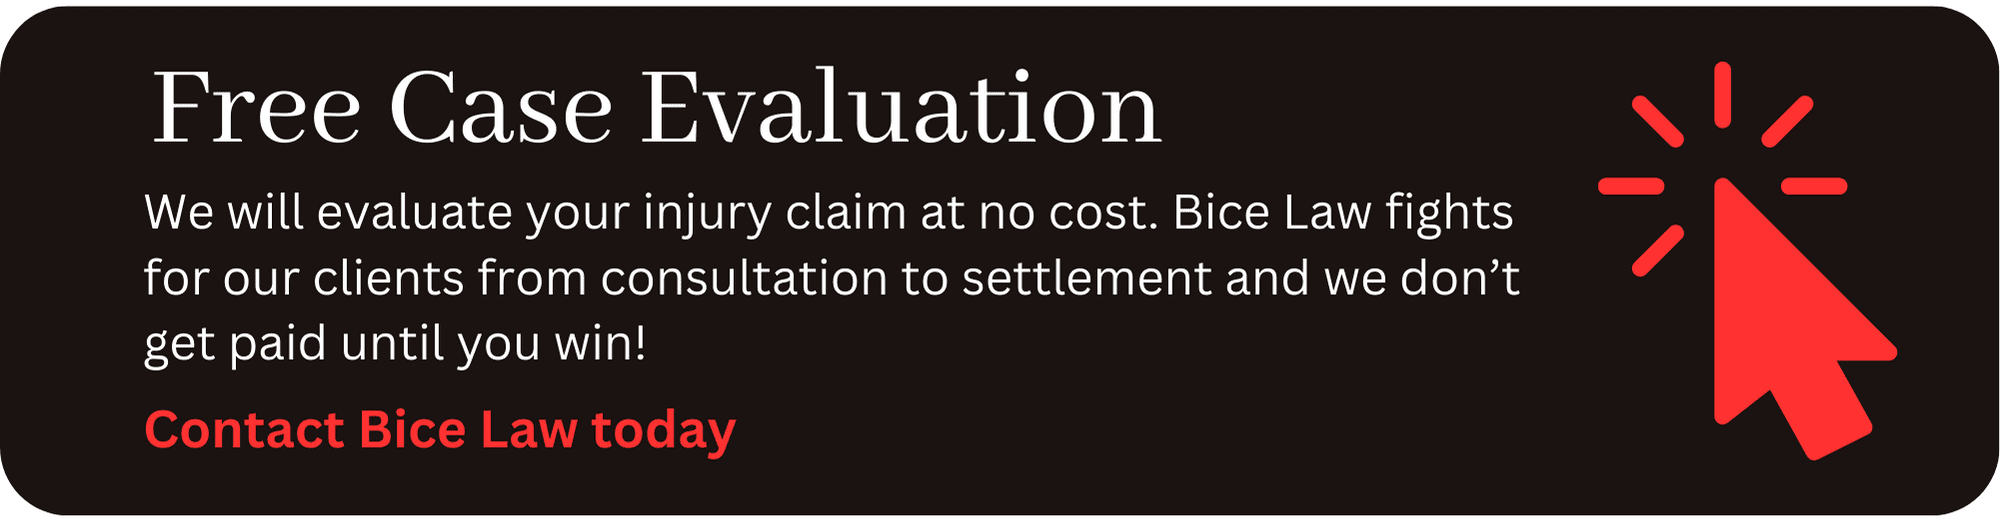 Free Caase Evaluation Button - Car Accident Injury Case